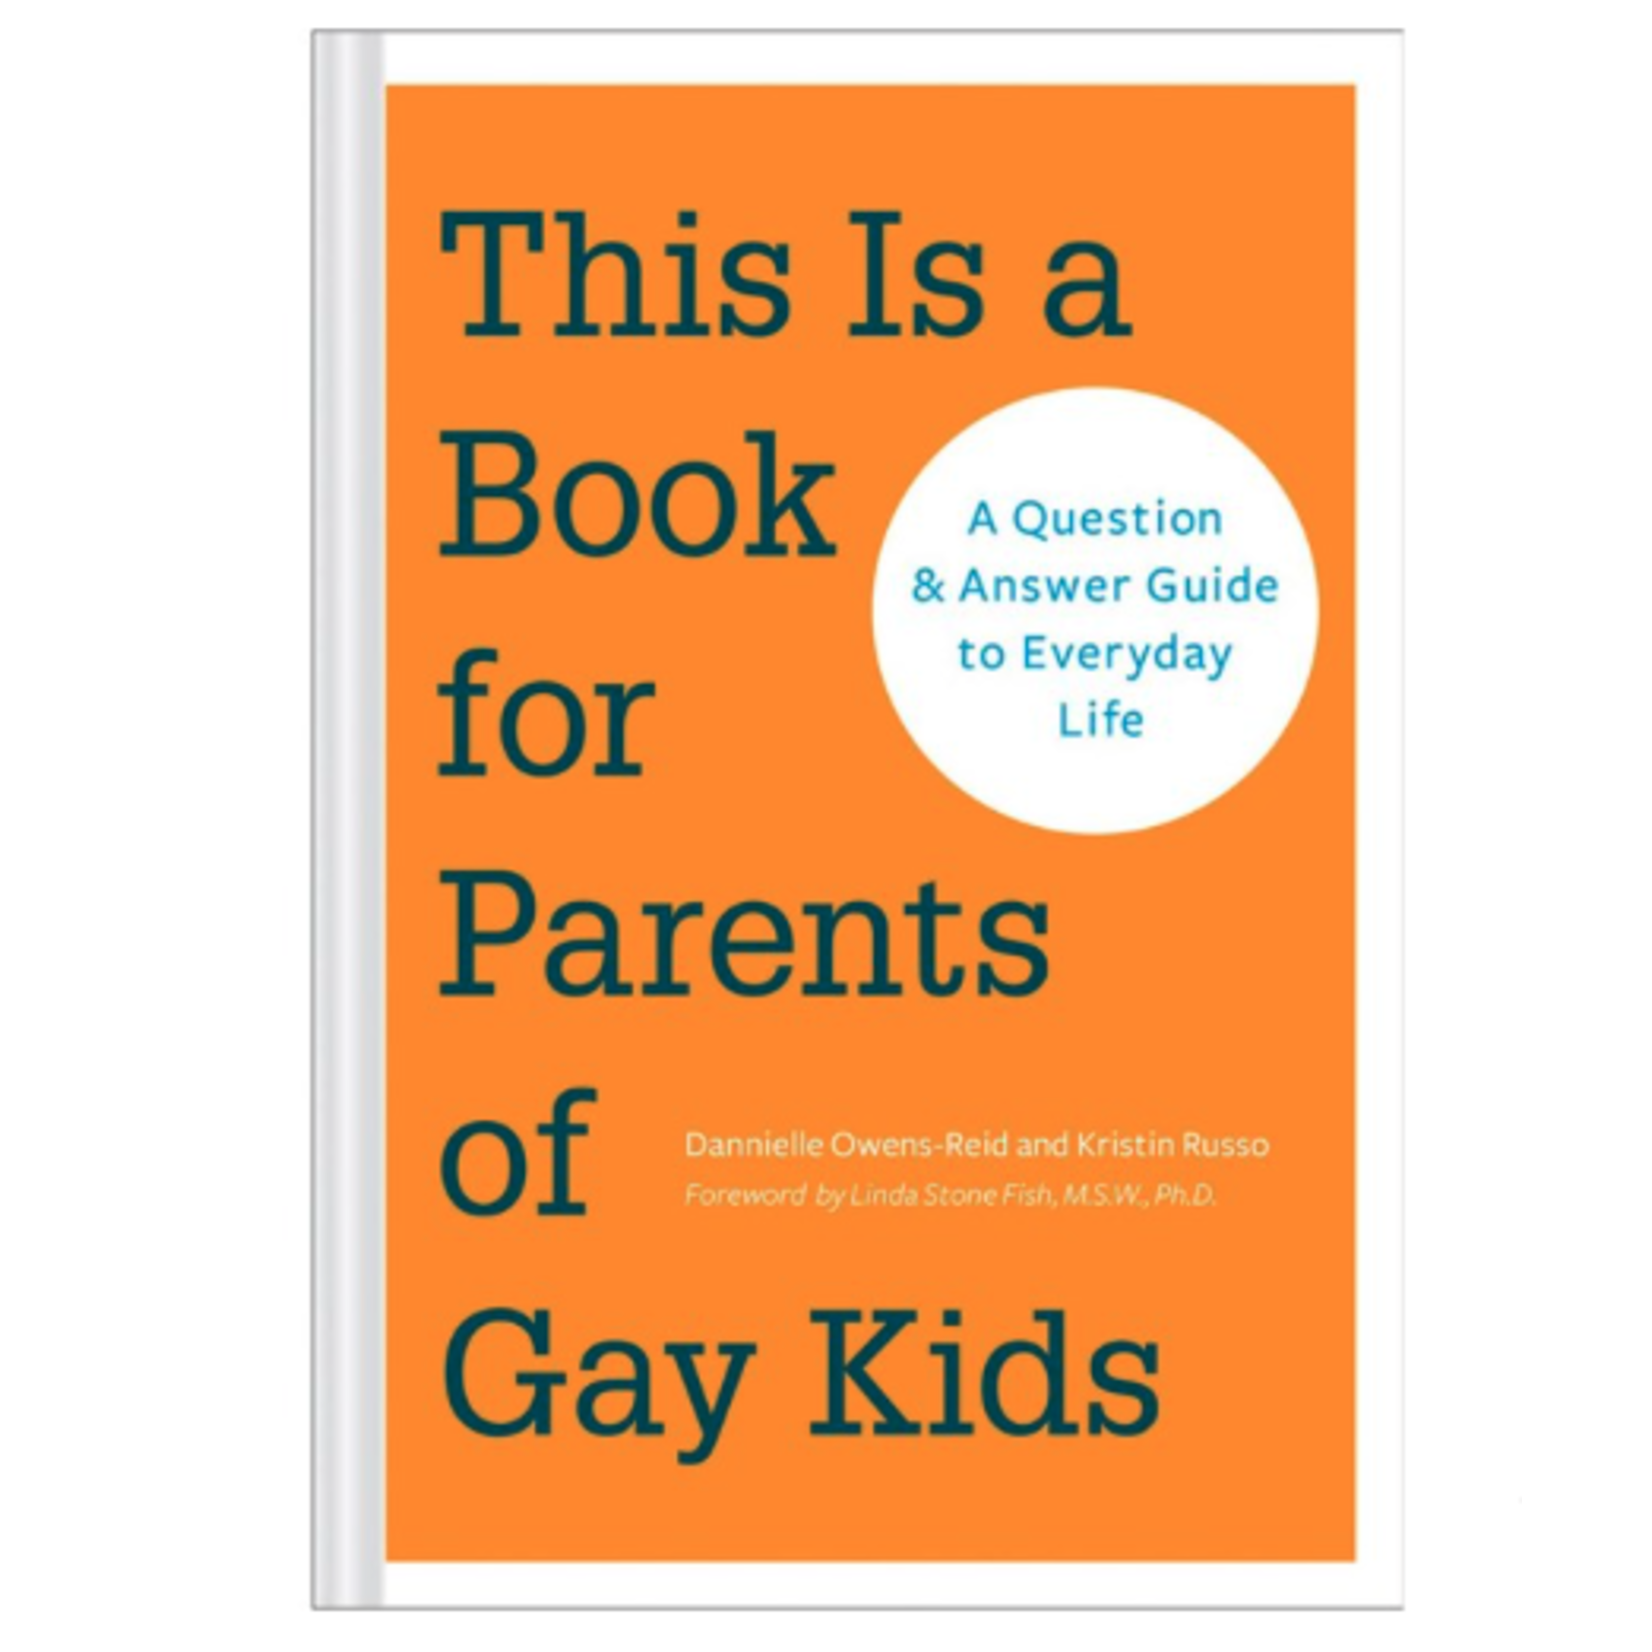 This is a Book for Parents of Gay Kids